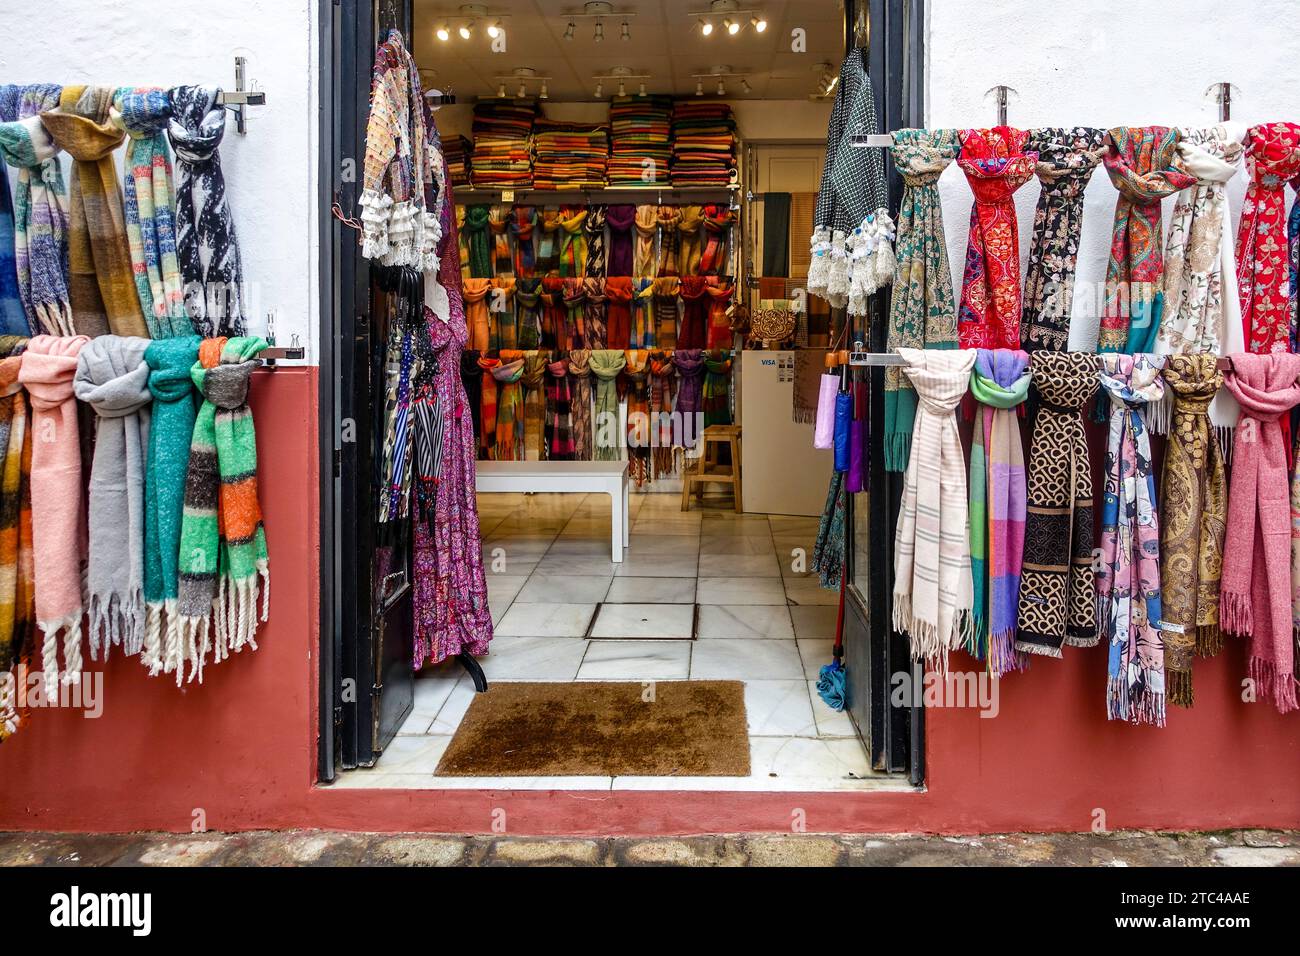 Colourful Scarf Display at Boutique Shop Entrance in Seville, Spain. Stock Photo